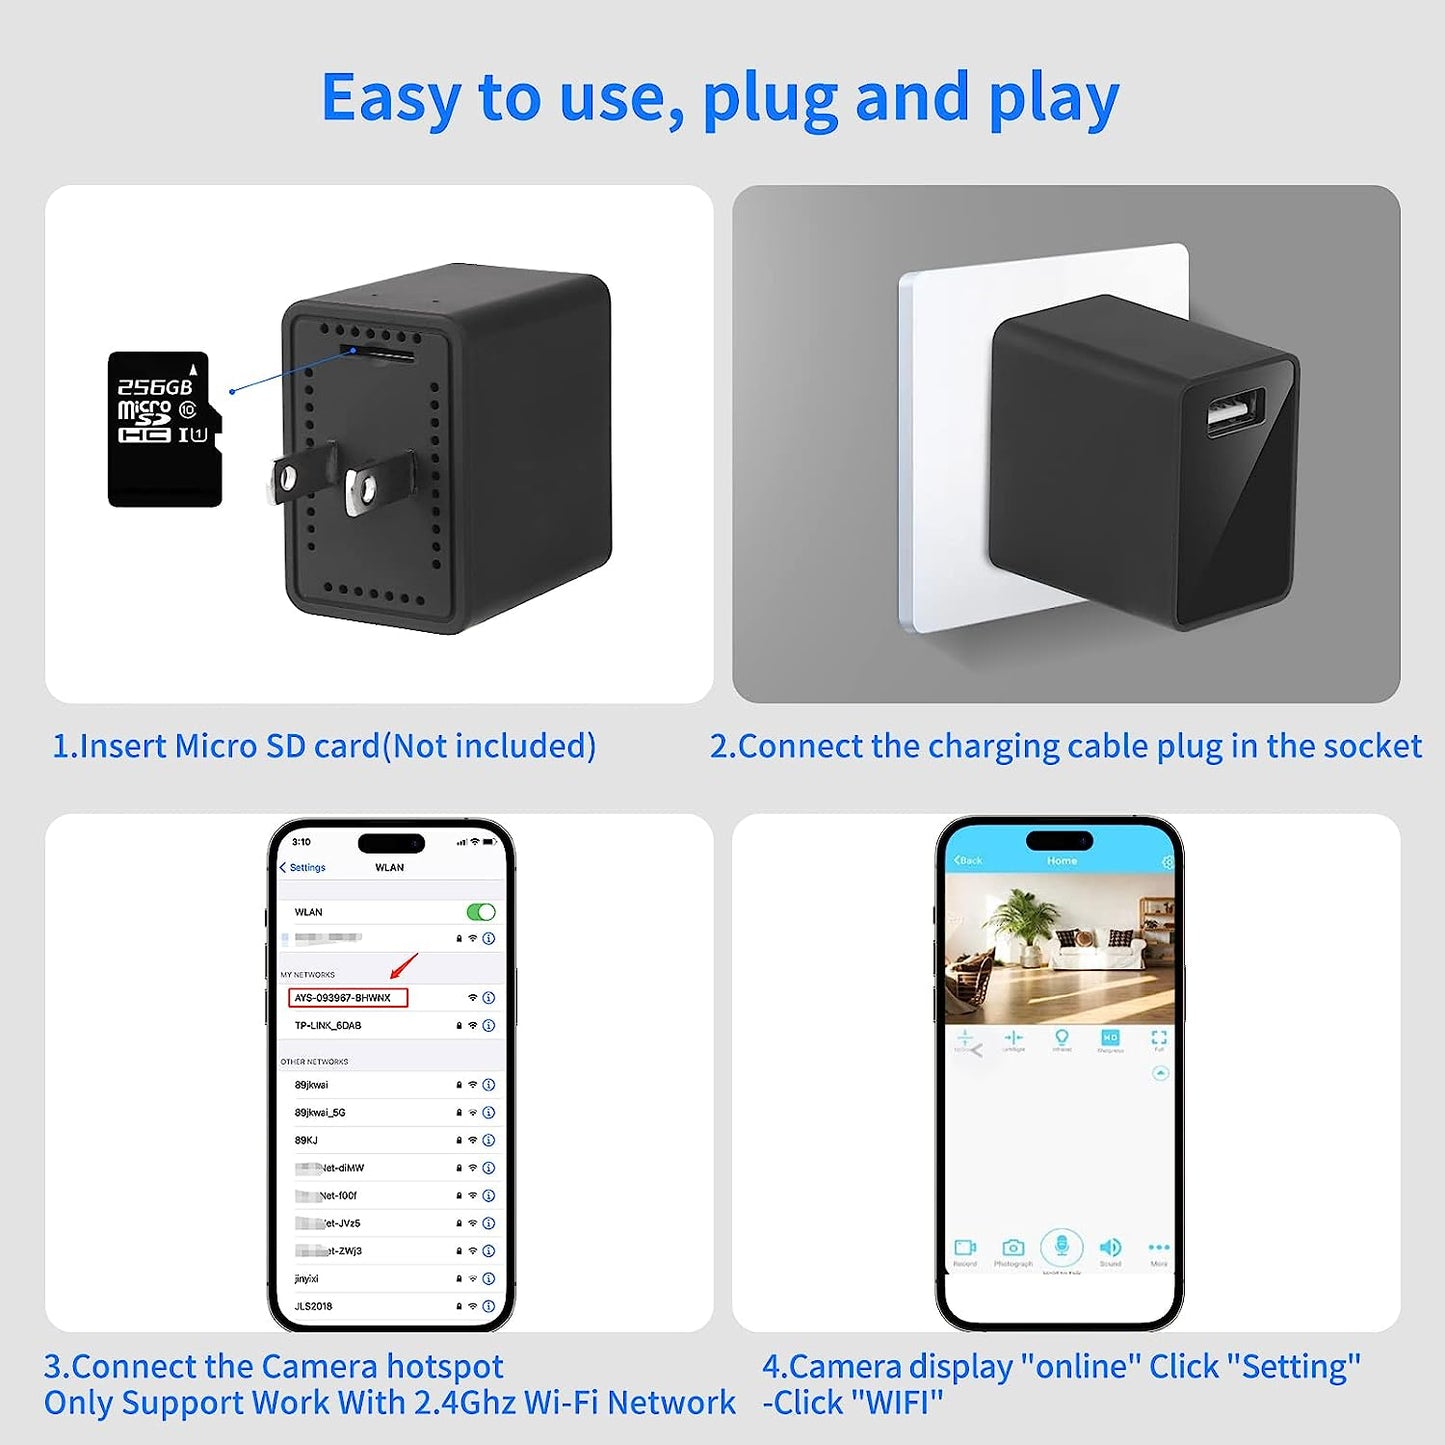 New Hidden Camera Charger Full 1080P HD Wireless Nanny Cam Mini USB Charger with Motion Detection, Spy Cameras for Home Security, Office, Baby, Pets, Elderly Parents